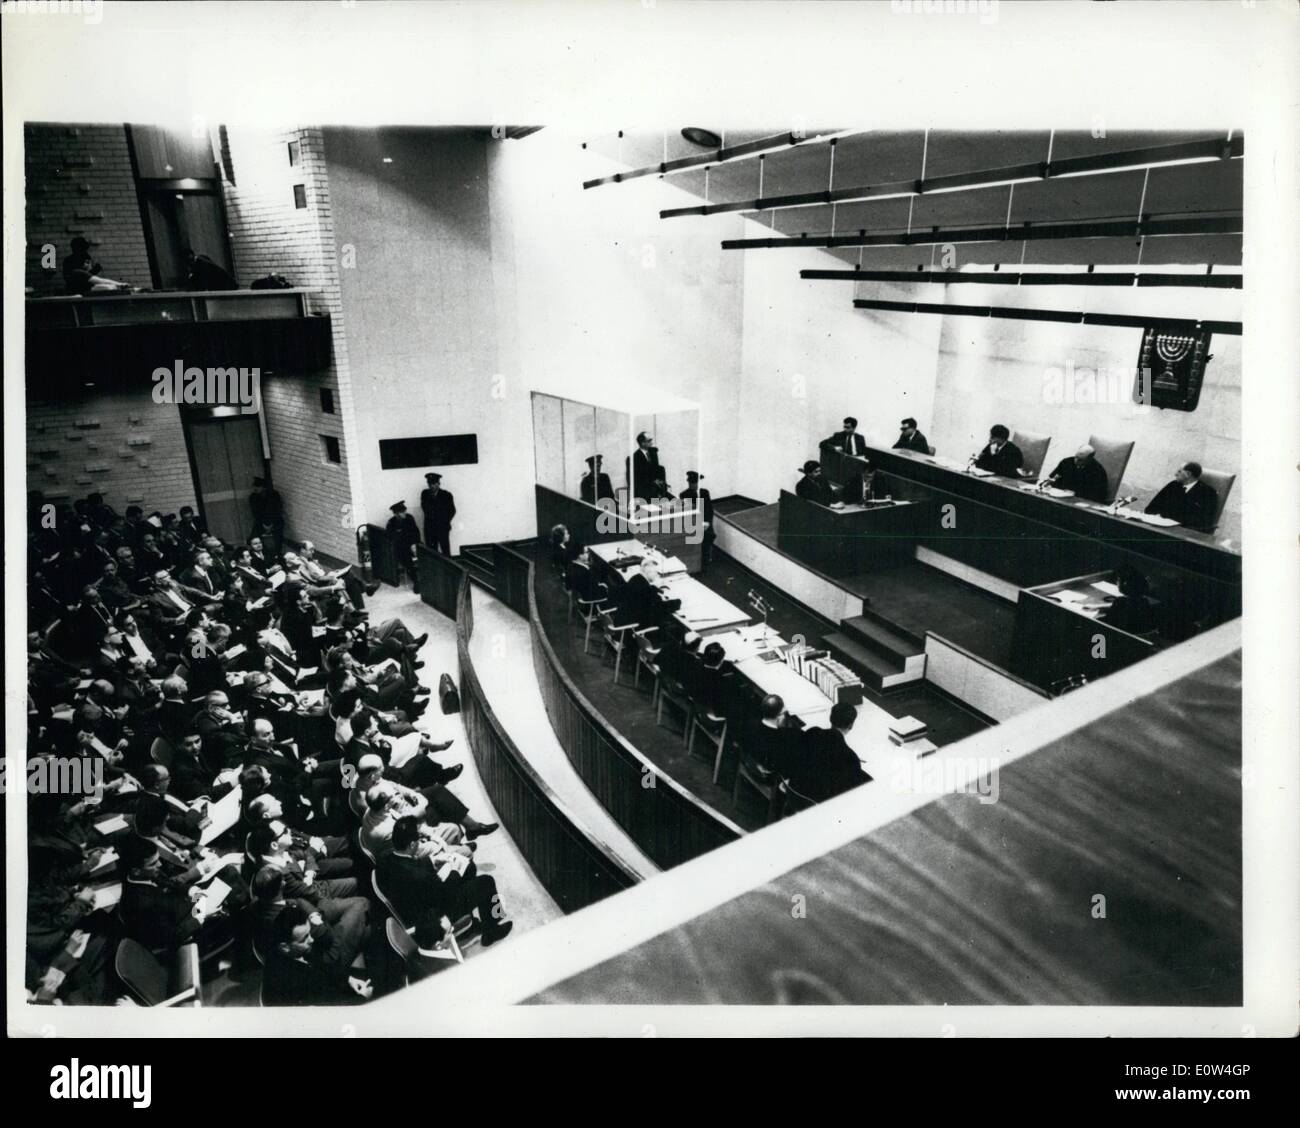 Apr. 04, 1961 - Trial of Adolf Eichmann continues in Jerusalem : The trail continues in Jerusalem of Adolf Eichmann - former Nazi S.s. Colonel - on the charges of mass murder of millions of Jews - in Nazi concentration camps during the war. photo shows General view during the trial showing Eichmann in his bullet - proof dock - Tribunal to the right - and defense and prosecution counsels faction the tribunal. Stock Photo